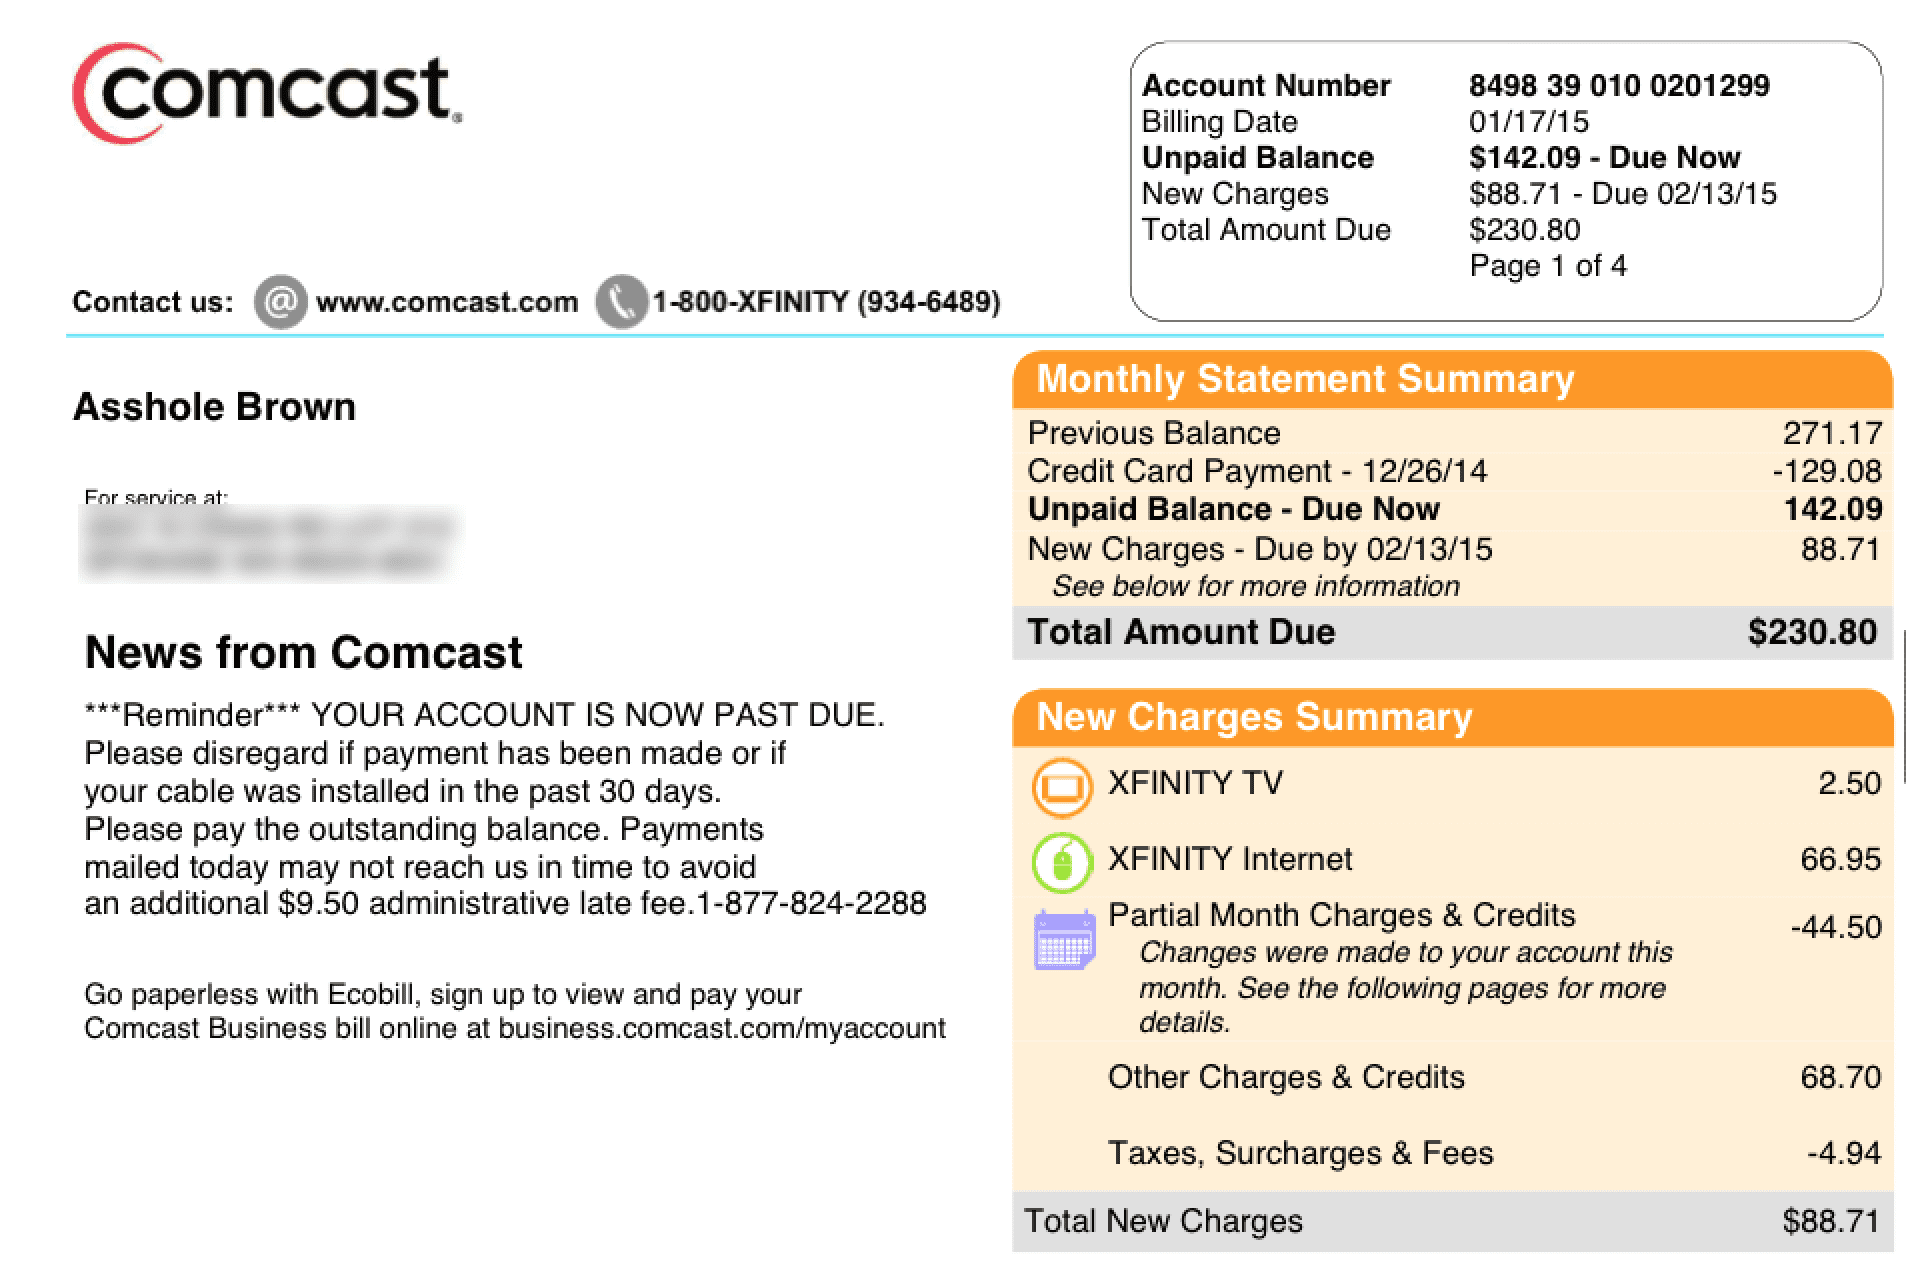 Comcast calls its customer, Mr. Brown an Asshole and puts it in writing